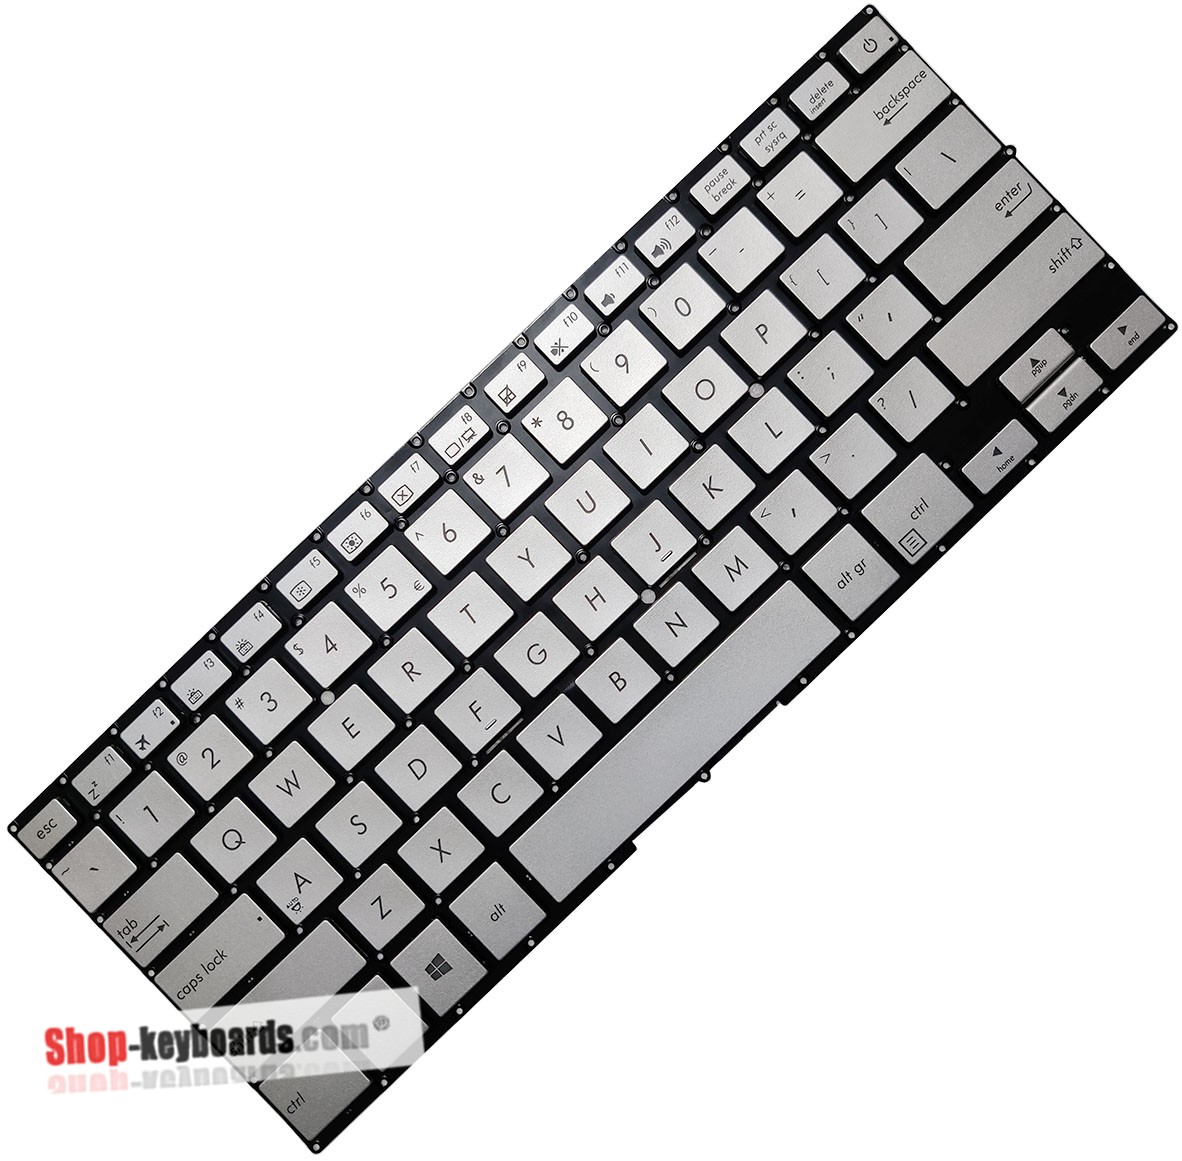 Asus 0KNB0-D620LA00 Keyboard replacement